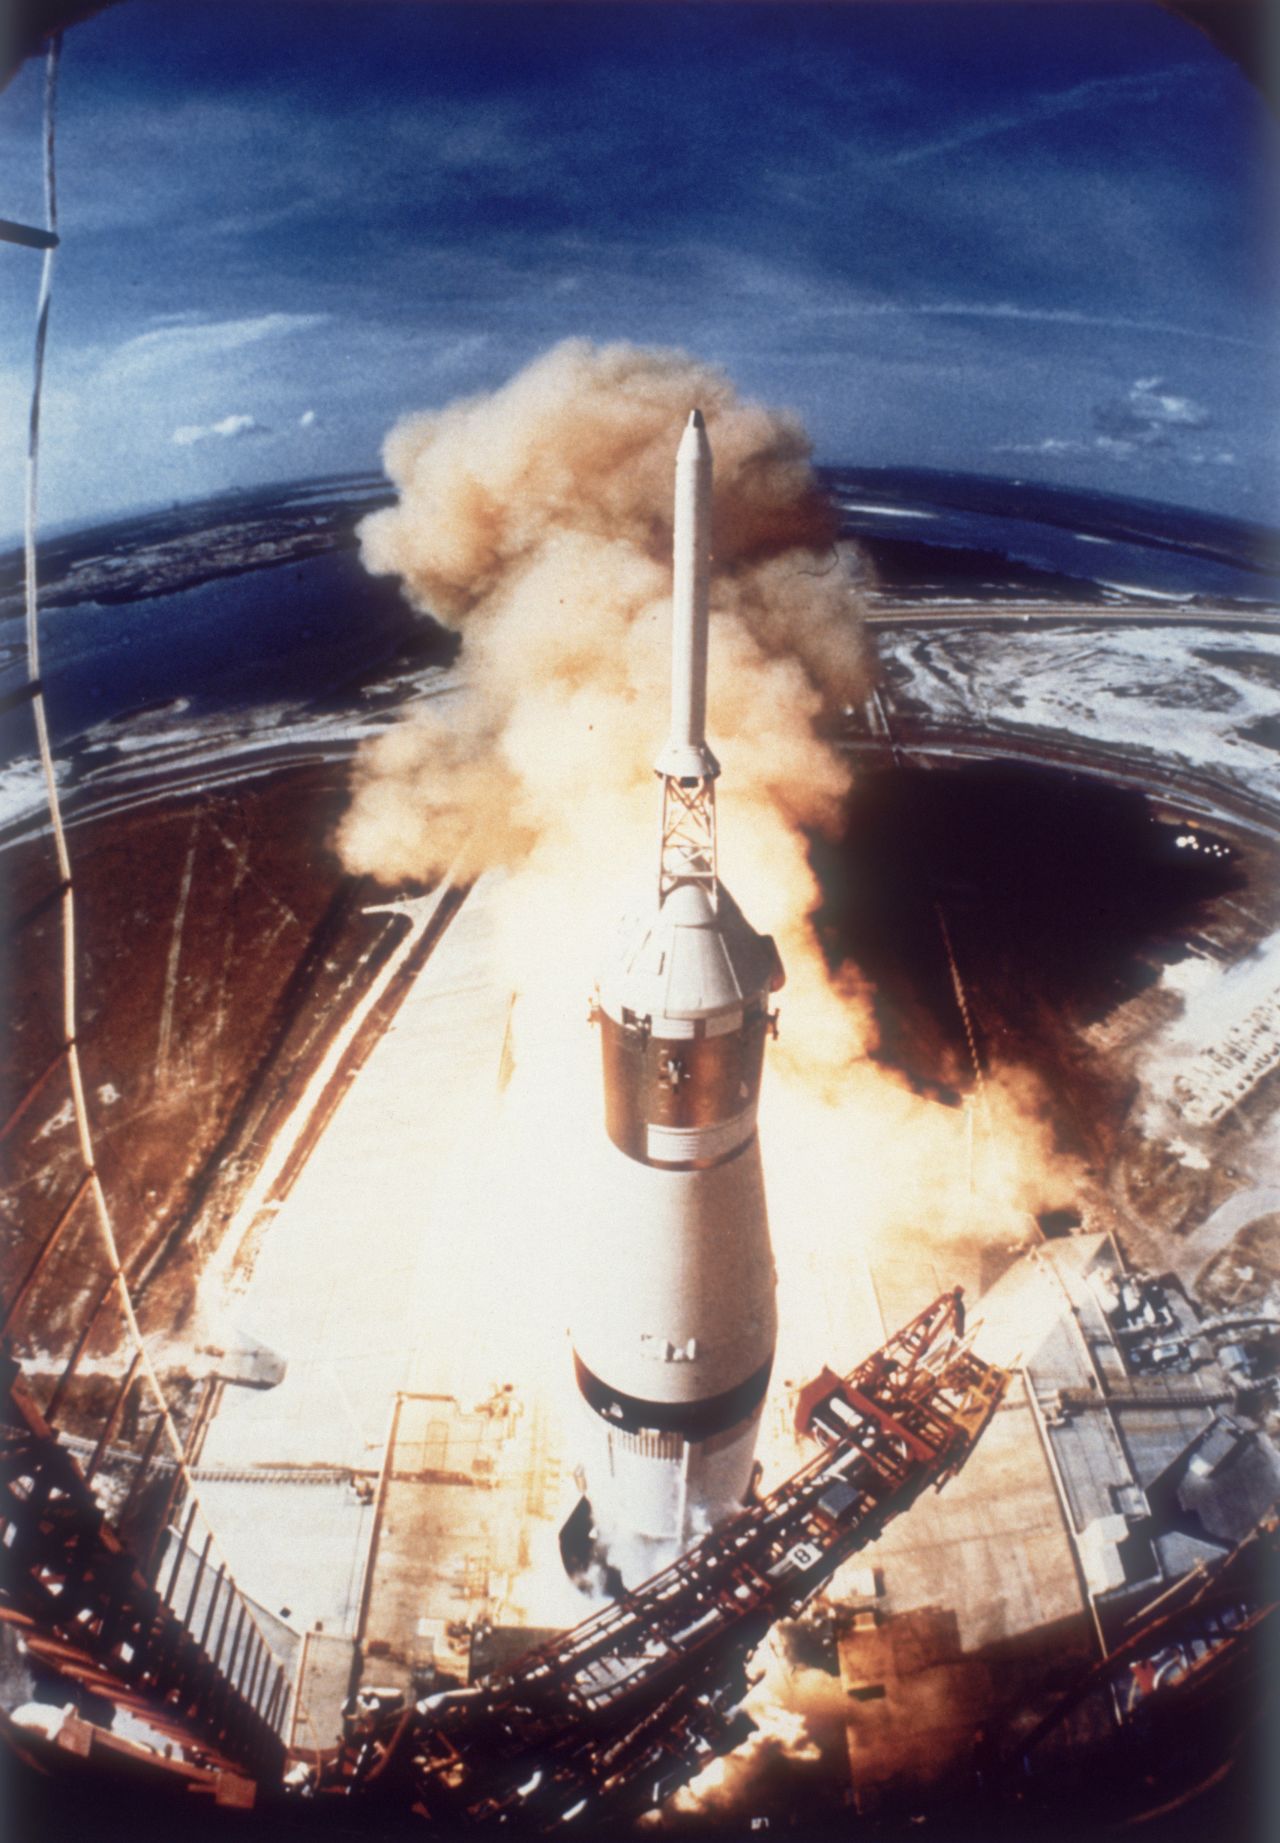 The Saturn V rocket carrying the crew of Apollo 11 takes off from Pad A, Launch Complex 39 at the Kennedy Space Center.